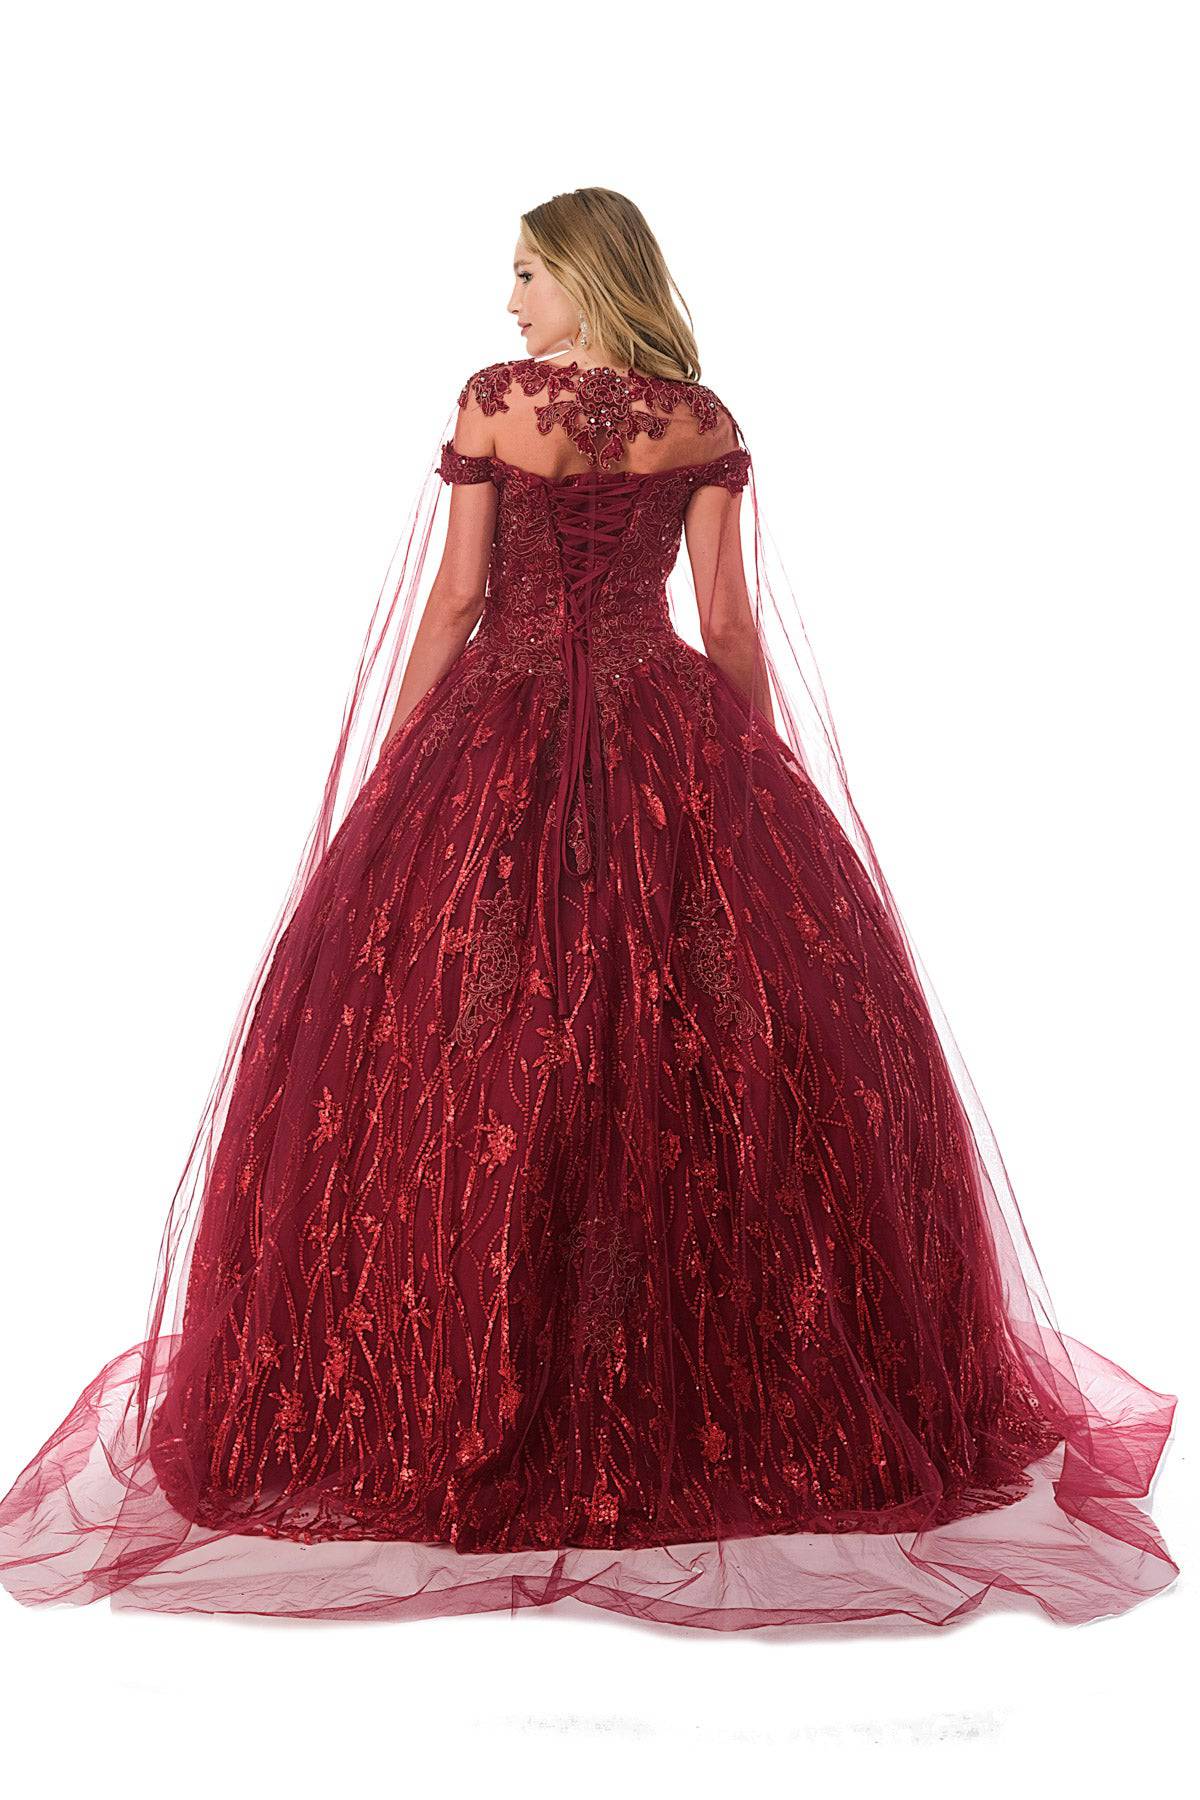 Aspeed L2804C  Floral & Sequin Burgundy Quinceanera Dress | 3 Colors - NORMA REED